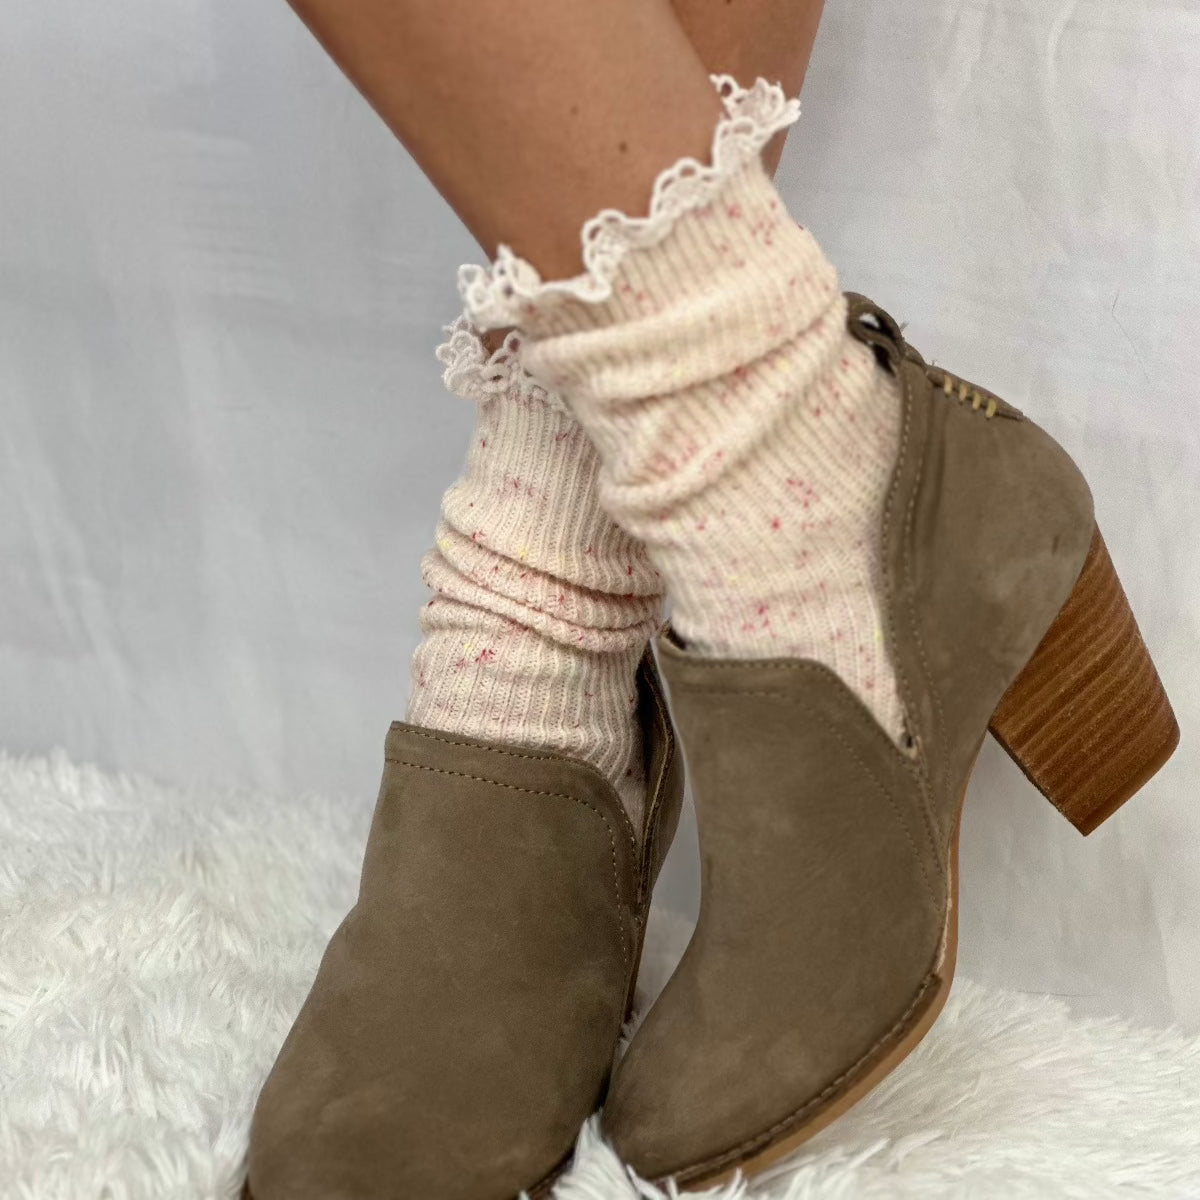 Pastel bootie lace topped ankle socks women, fashion socks for short boots, cute socks for ladies